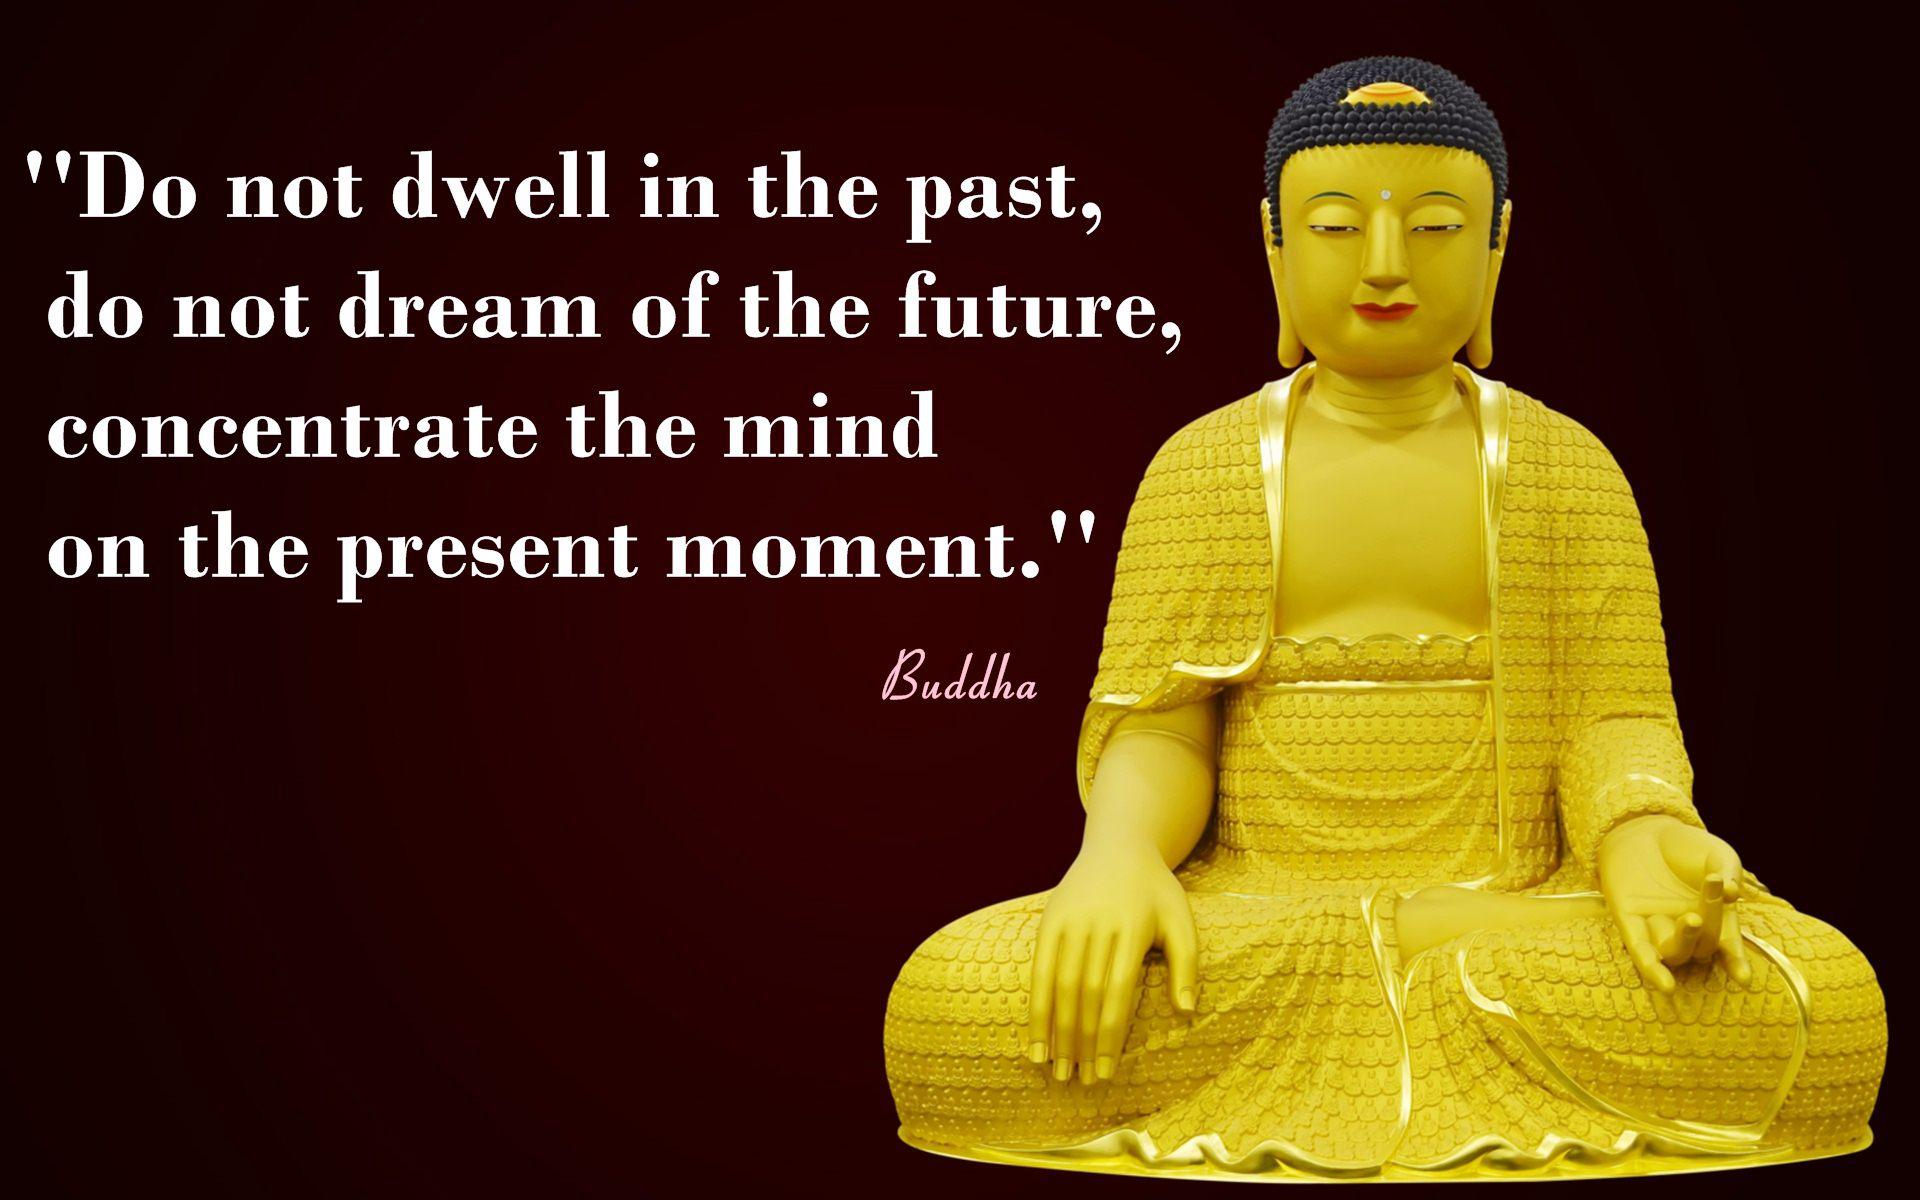 Buddha Quotes About Change